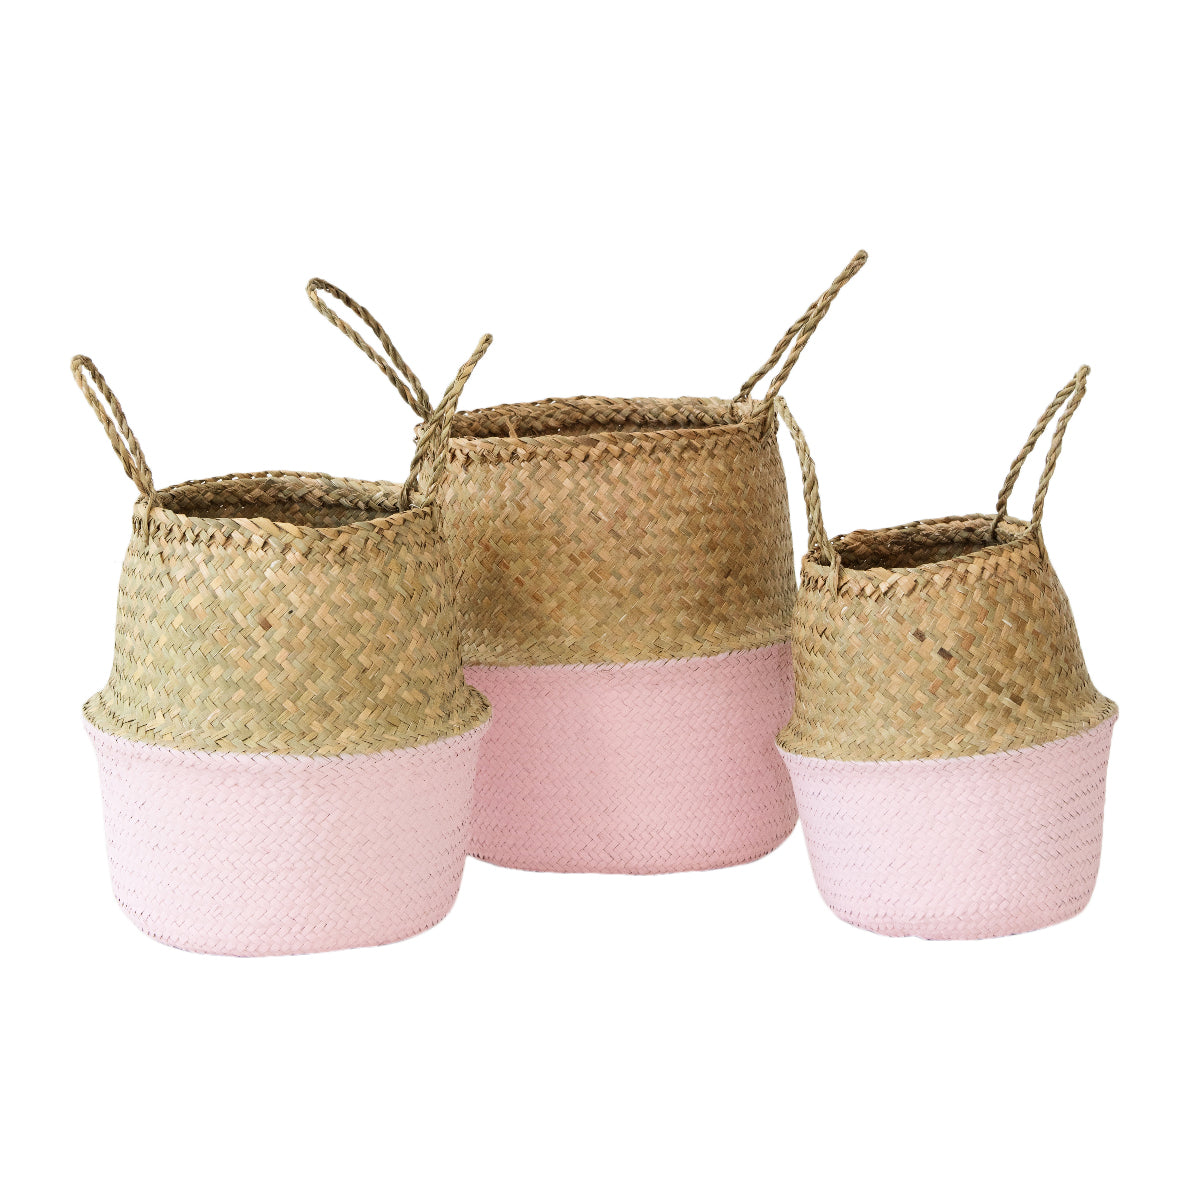 Seagrass Belly Basket Hint of Blush